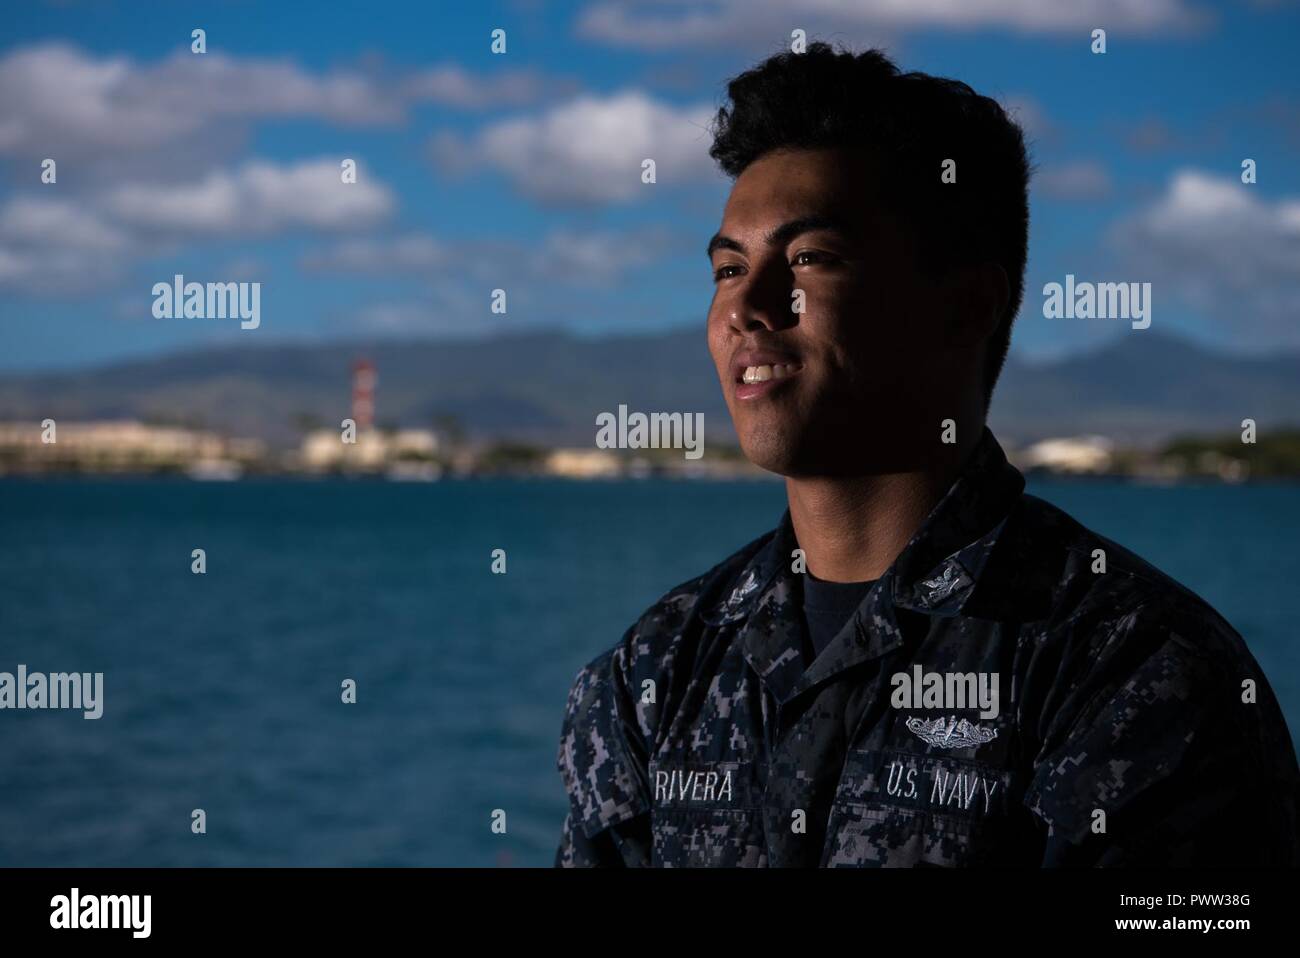 PEARL HARBOR (June 27, 2017) - Faces of the Deep: 'I graduated from high school with a desire to do something different and a goal to attend college,' said Machinist’s Mate (Nuclear) 2nd Class (SS) Romero Rivera, native of San Jose, California and Sailor aboard the Virginia-class submarine USS Mississippi (SSN 782). 'As a Sailor, I want to use the work experience to develop transferable skills so I can take them with me to college.'    'The Navy has taught me a lot about resilience, staying motivated and positively dealing with stress in the work place. There’s a lot of camaraderie on a submar Stock Photo